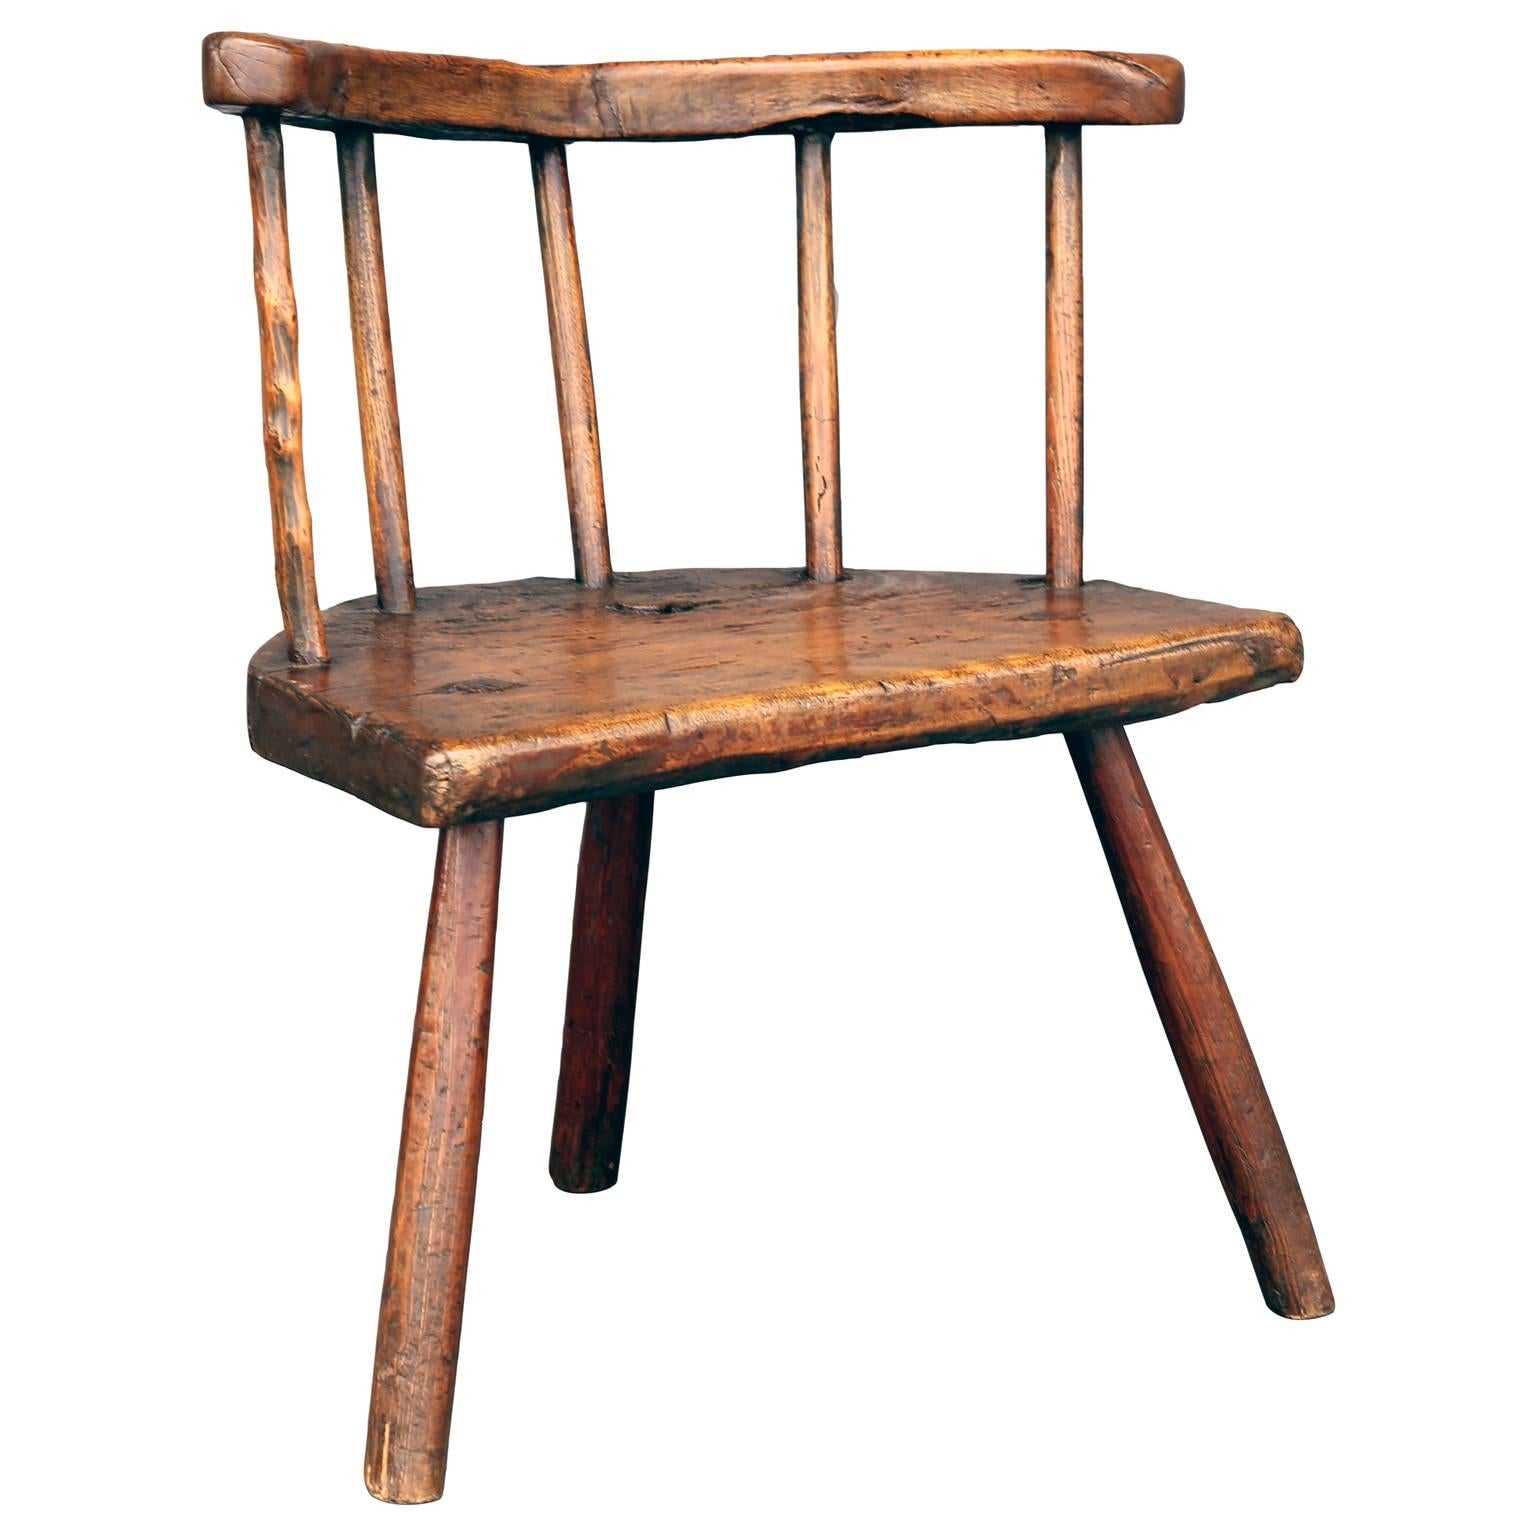 Early 18th Century Stick Chair from Wales